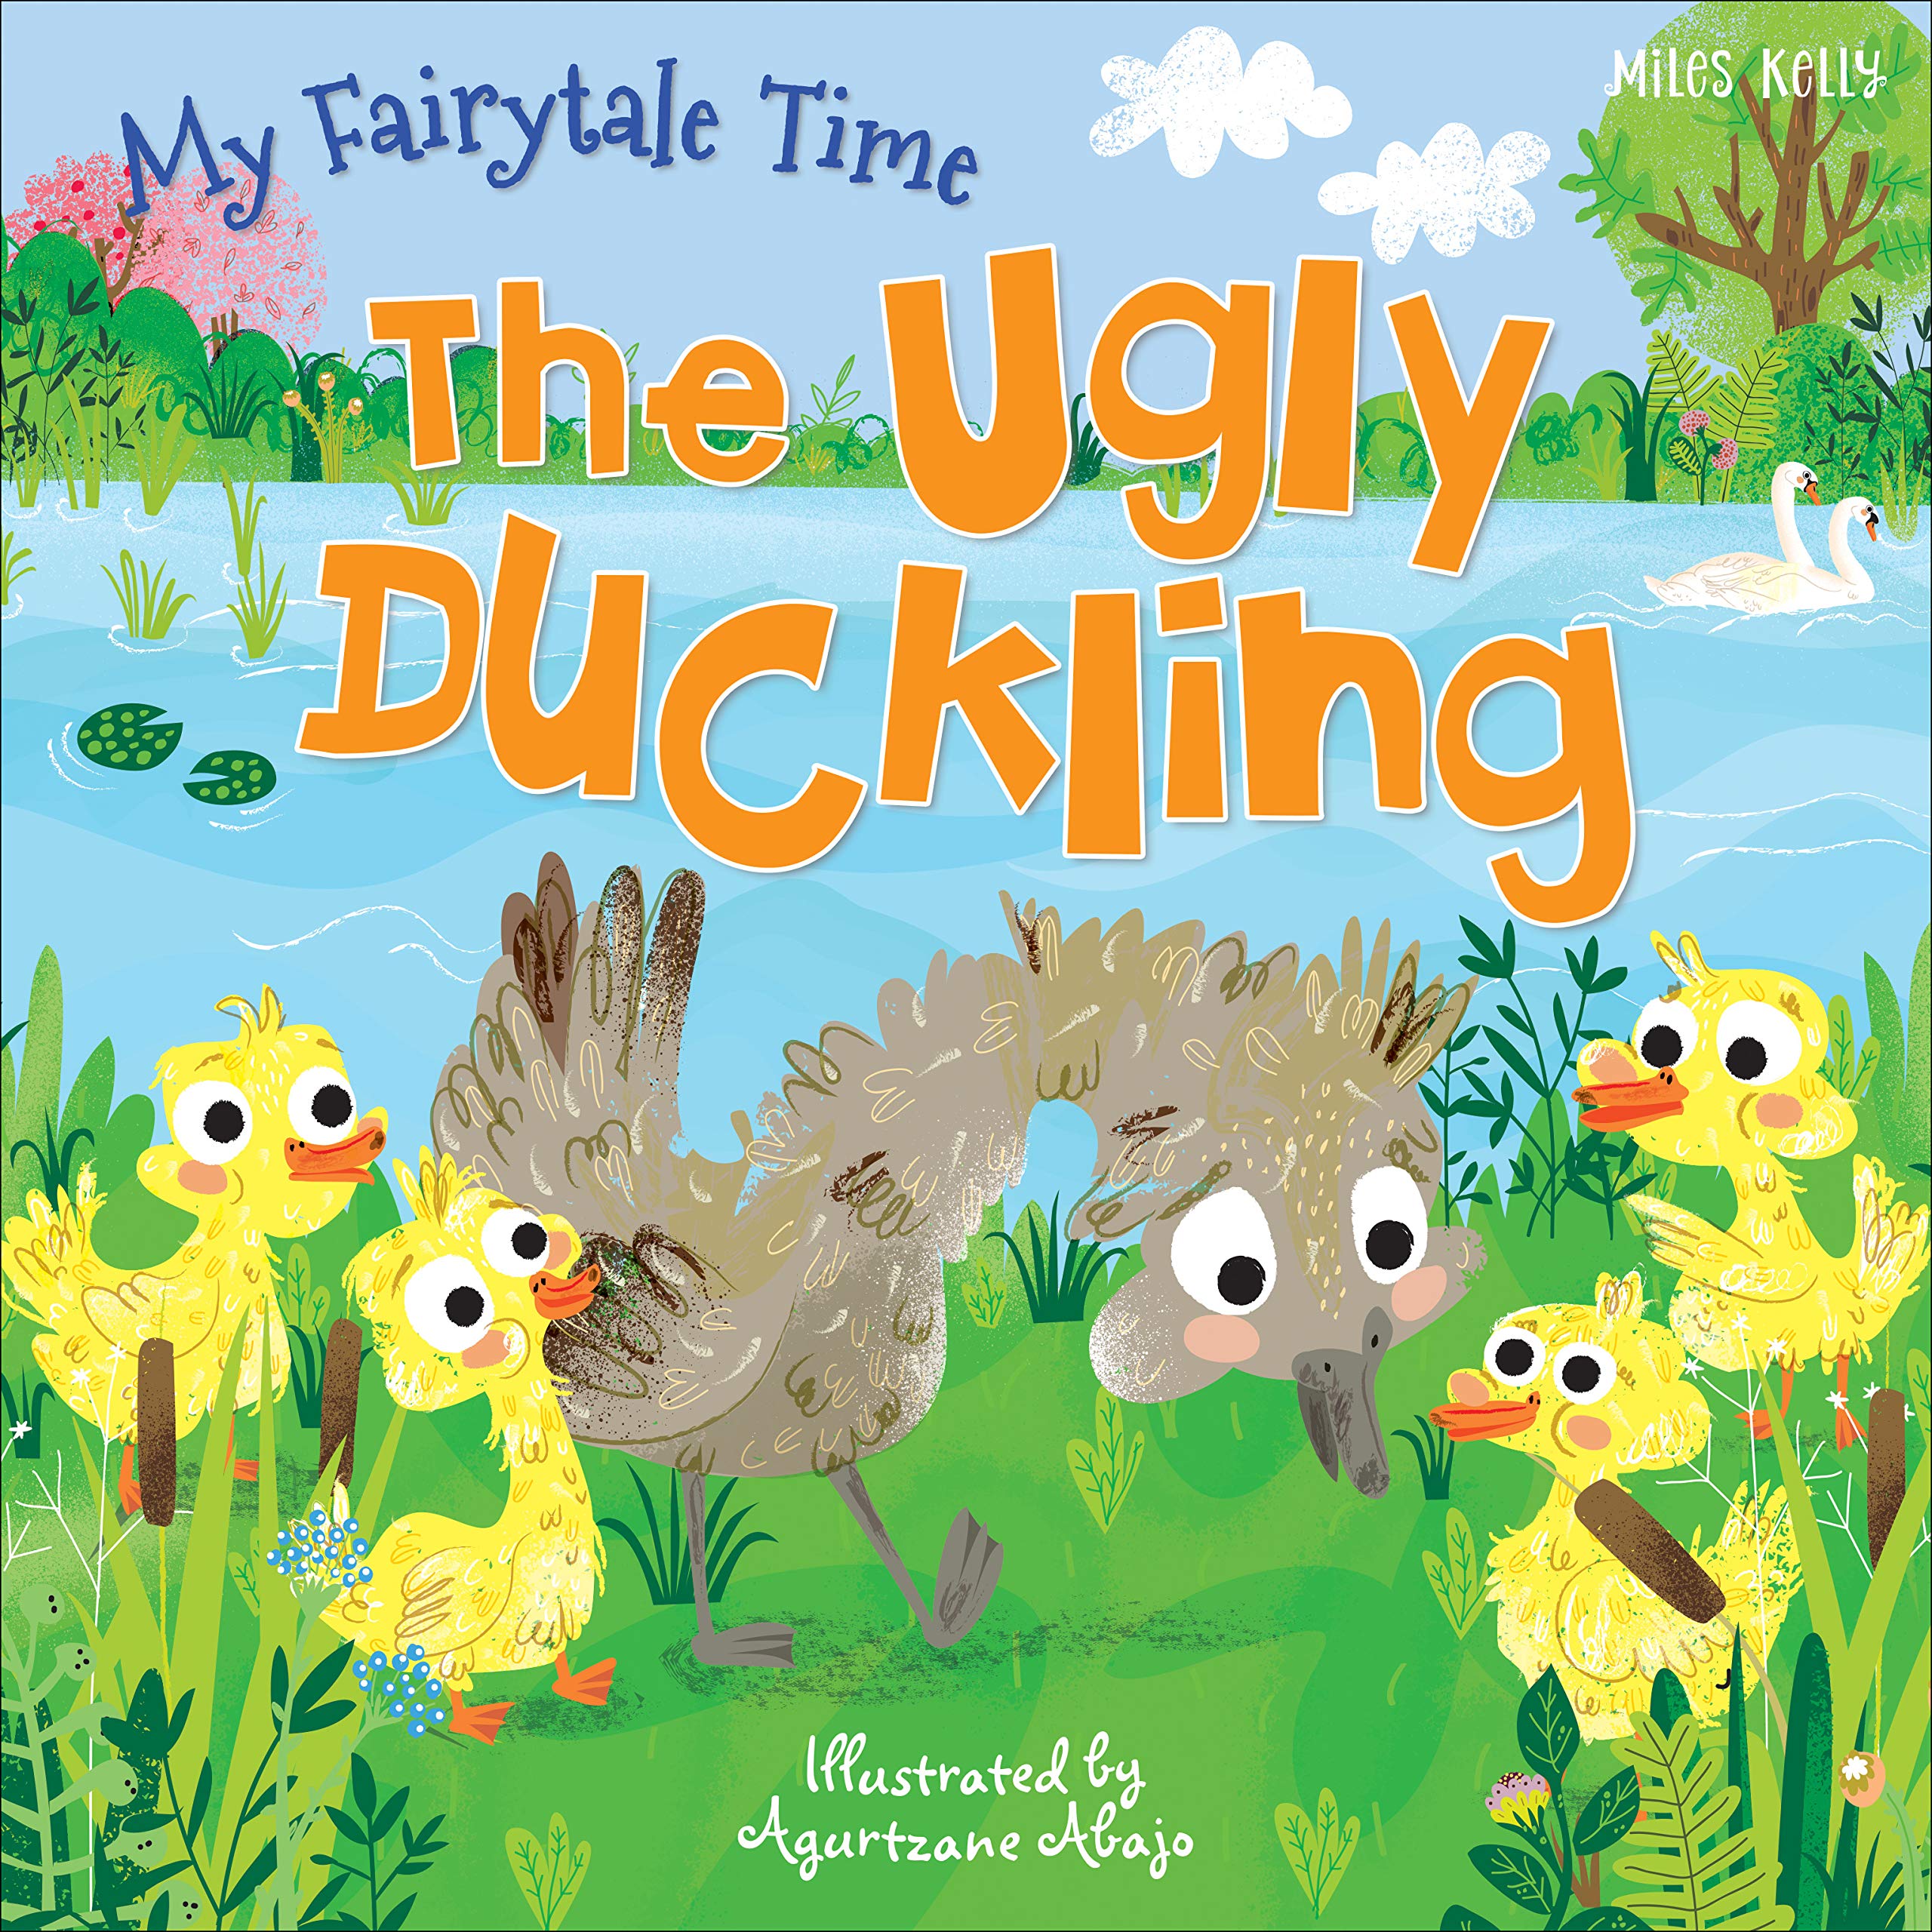 My Fairytale Time: The Ugly Duckling